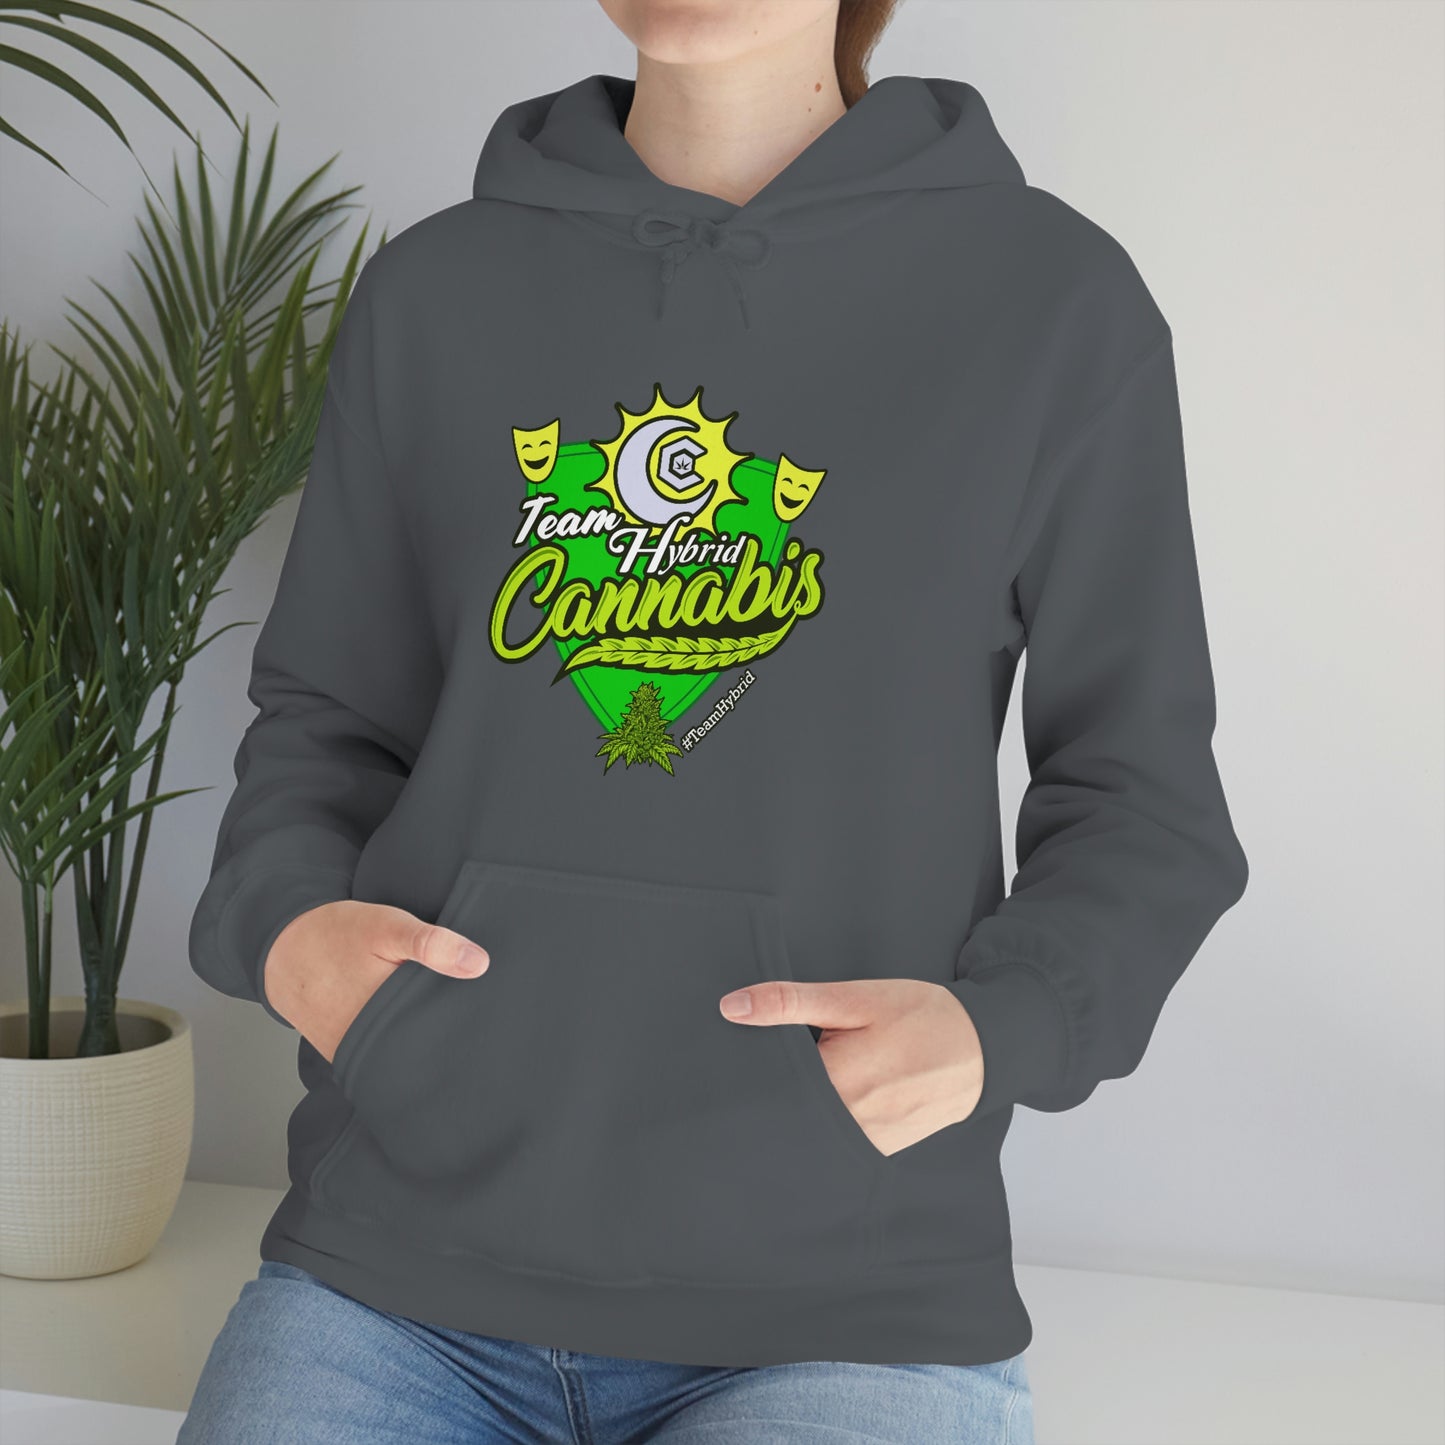 a woman wearing a gray hoodie with the word Team Hybrid Cannabis on it.